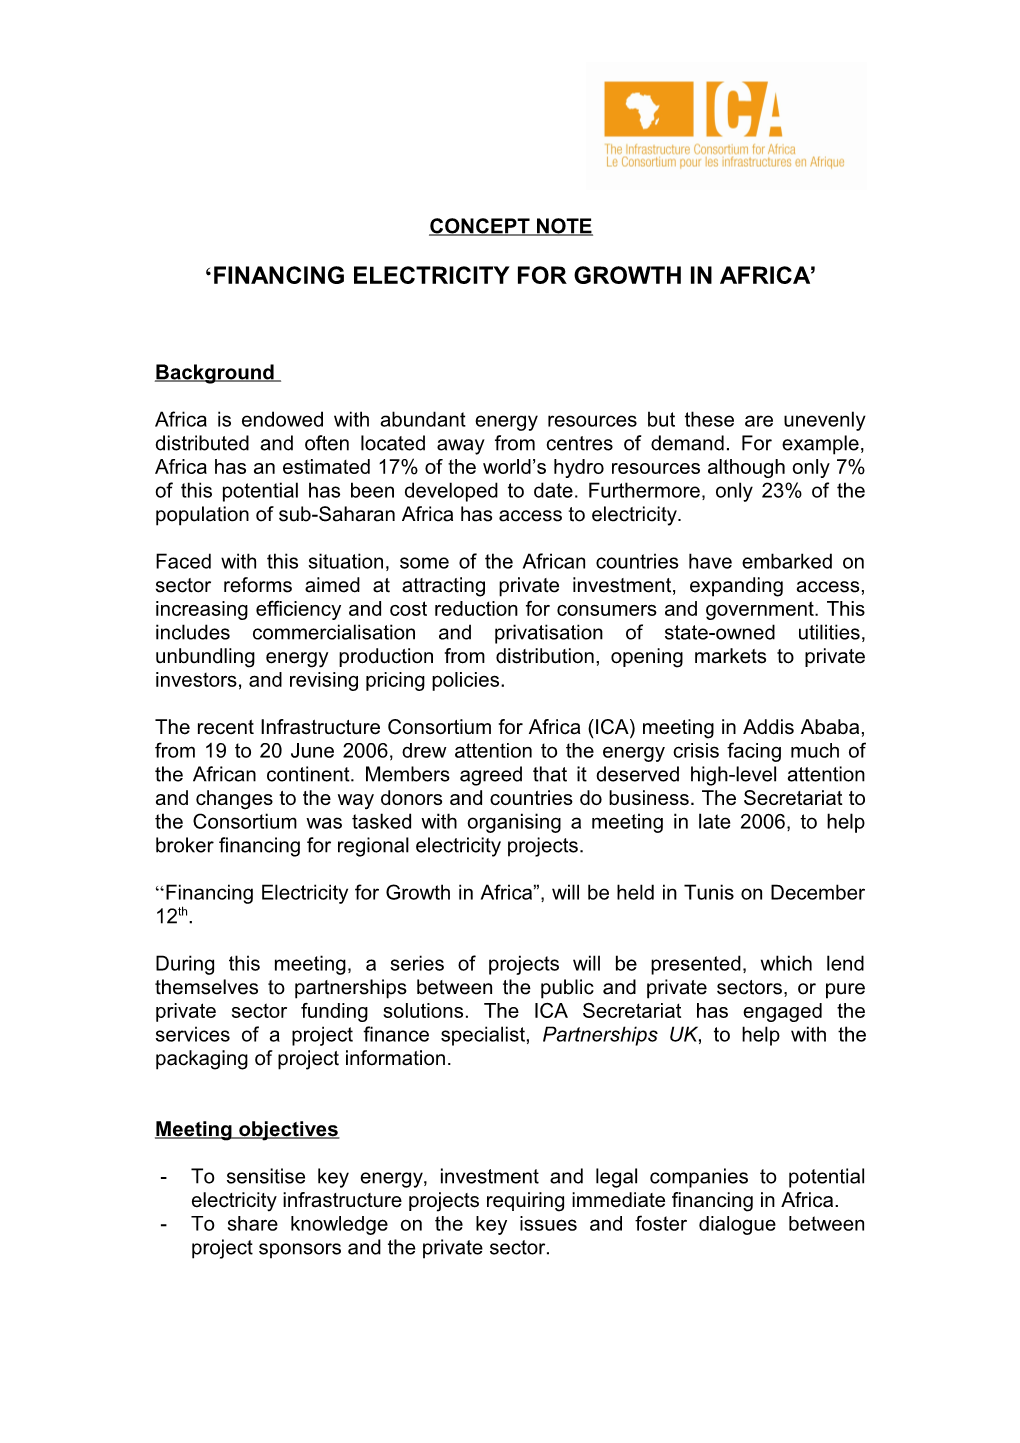 Financing Electricity for Growth in Africa